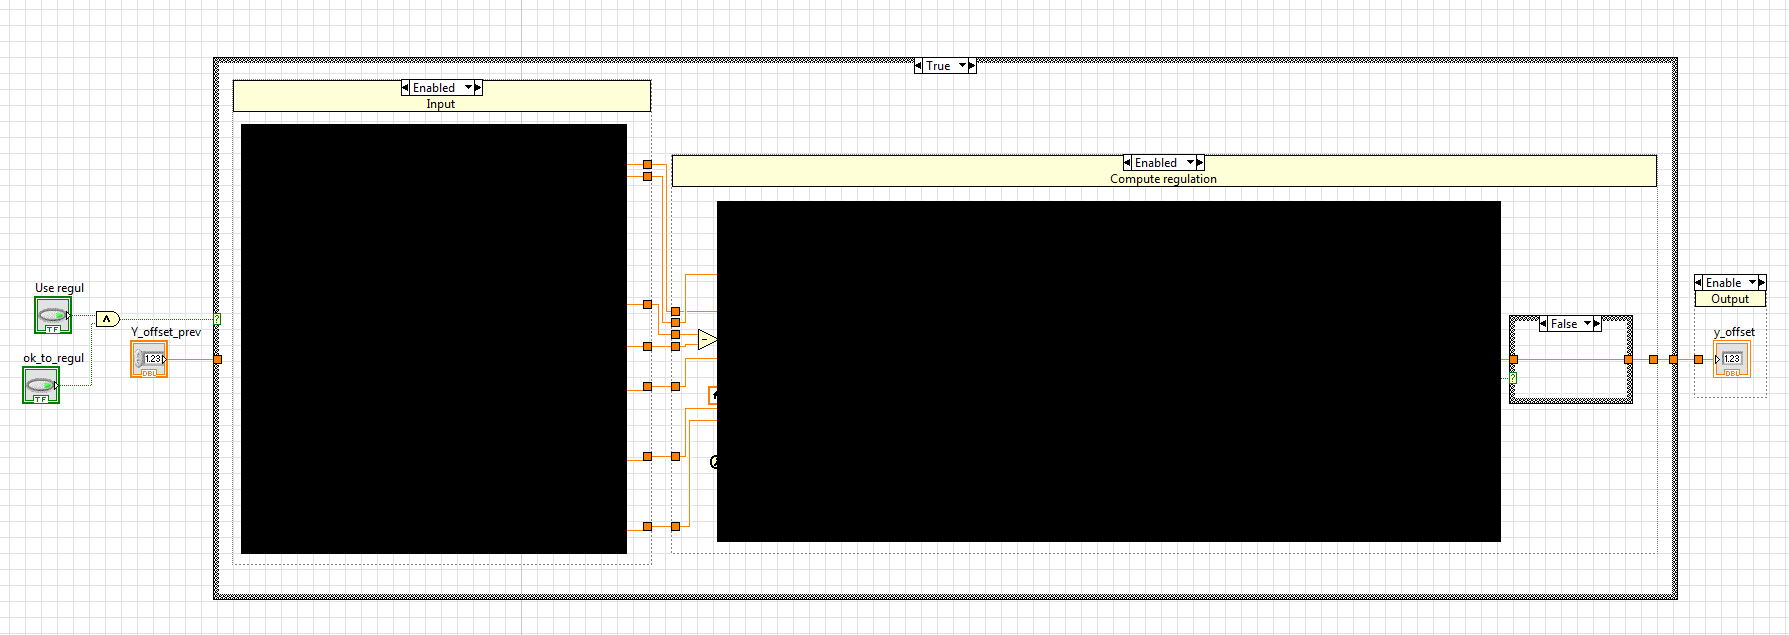 exemple_labview.png